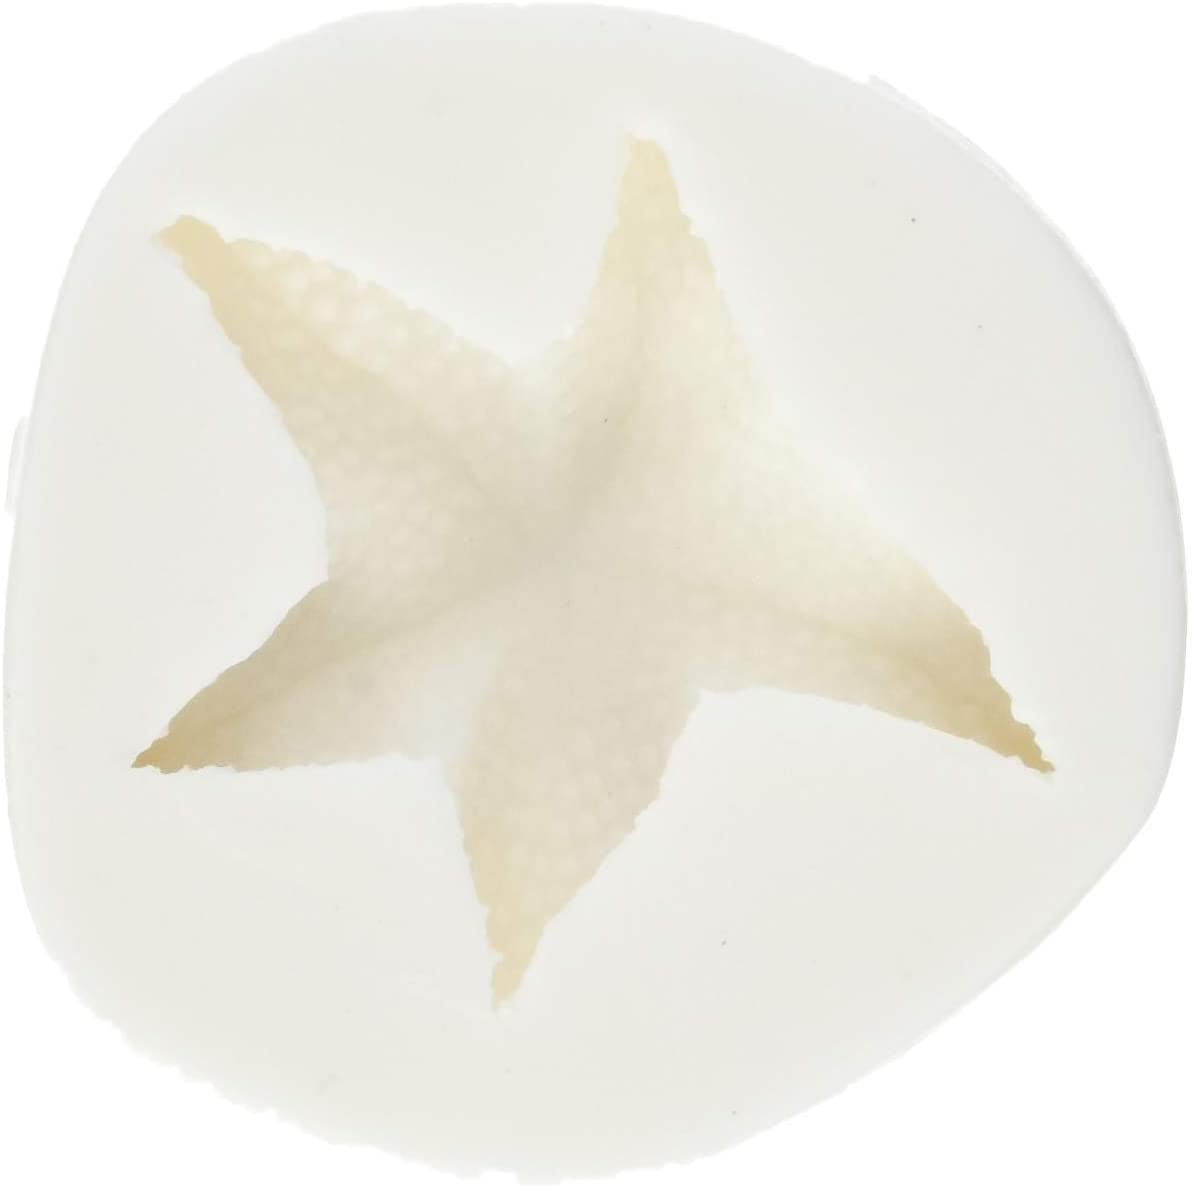 Staedter \'Städter 257504 Flexible – Model Starfish Silicone Mould, White, 4.5 x 4.5 x 3 cm